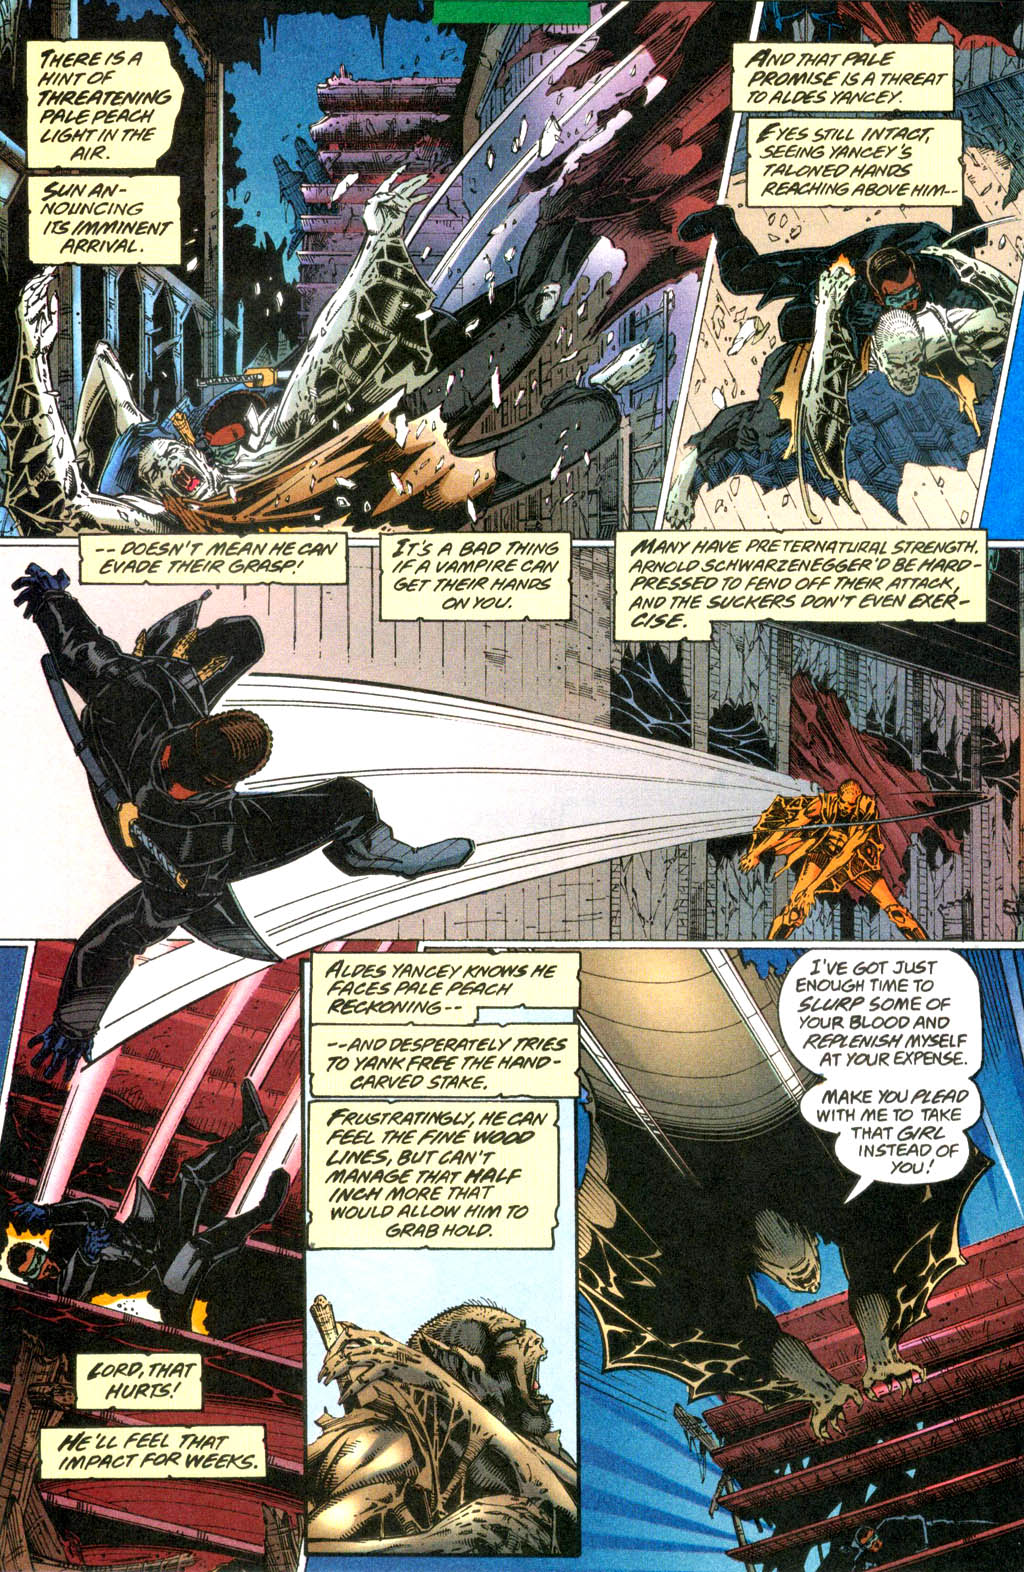 Blade (1998) 1 Page 14